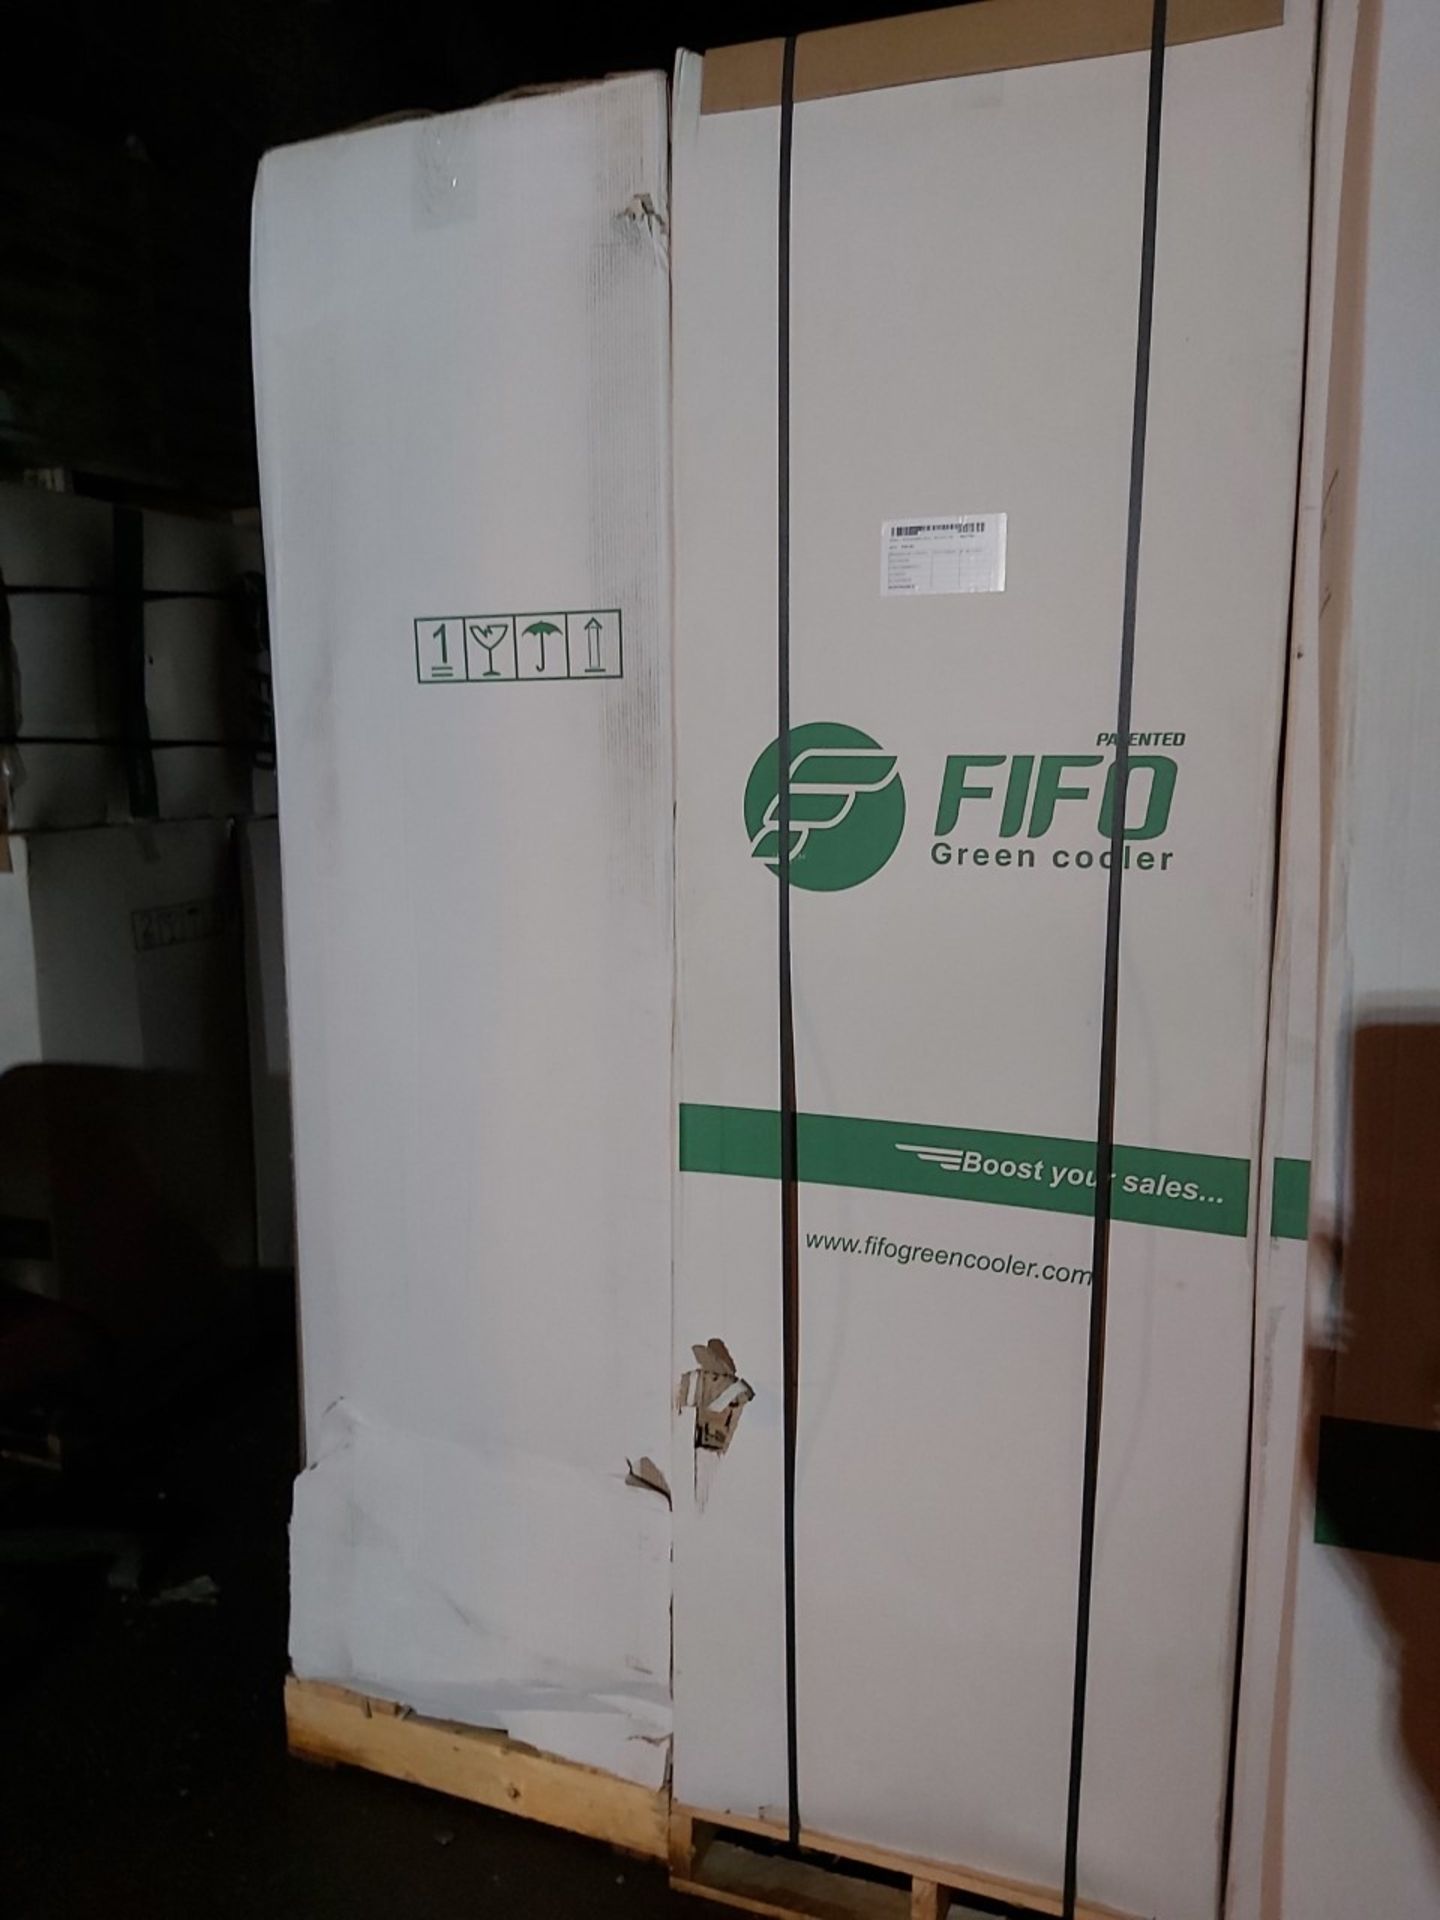 New Fifo XL Cooler Fridge. Dimensions (mm) 587 x 523 x 1962. Weight 102kg. All sealed and - Image 4 of 4